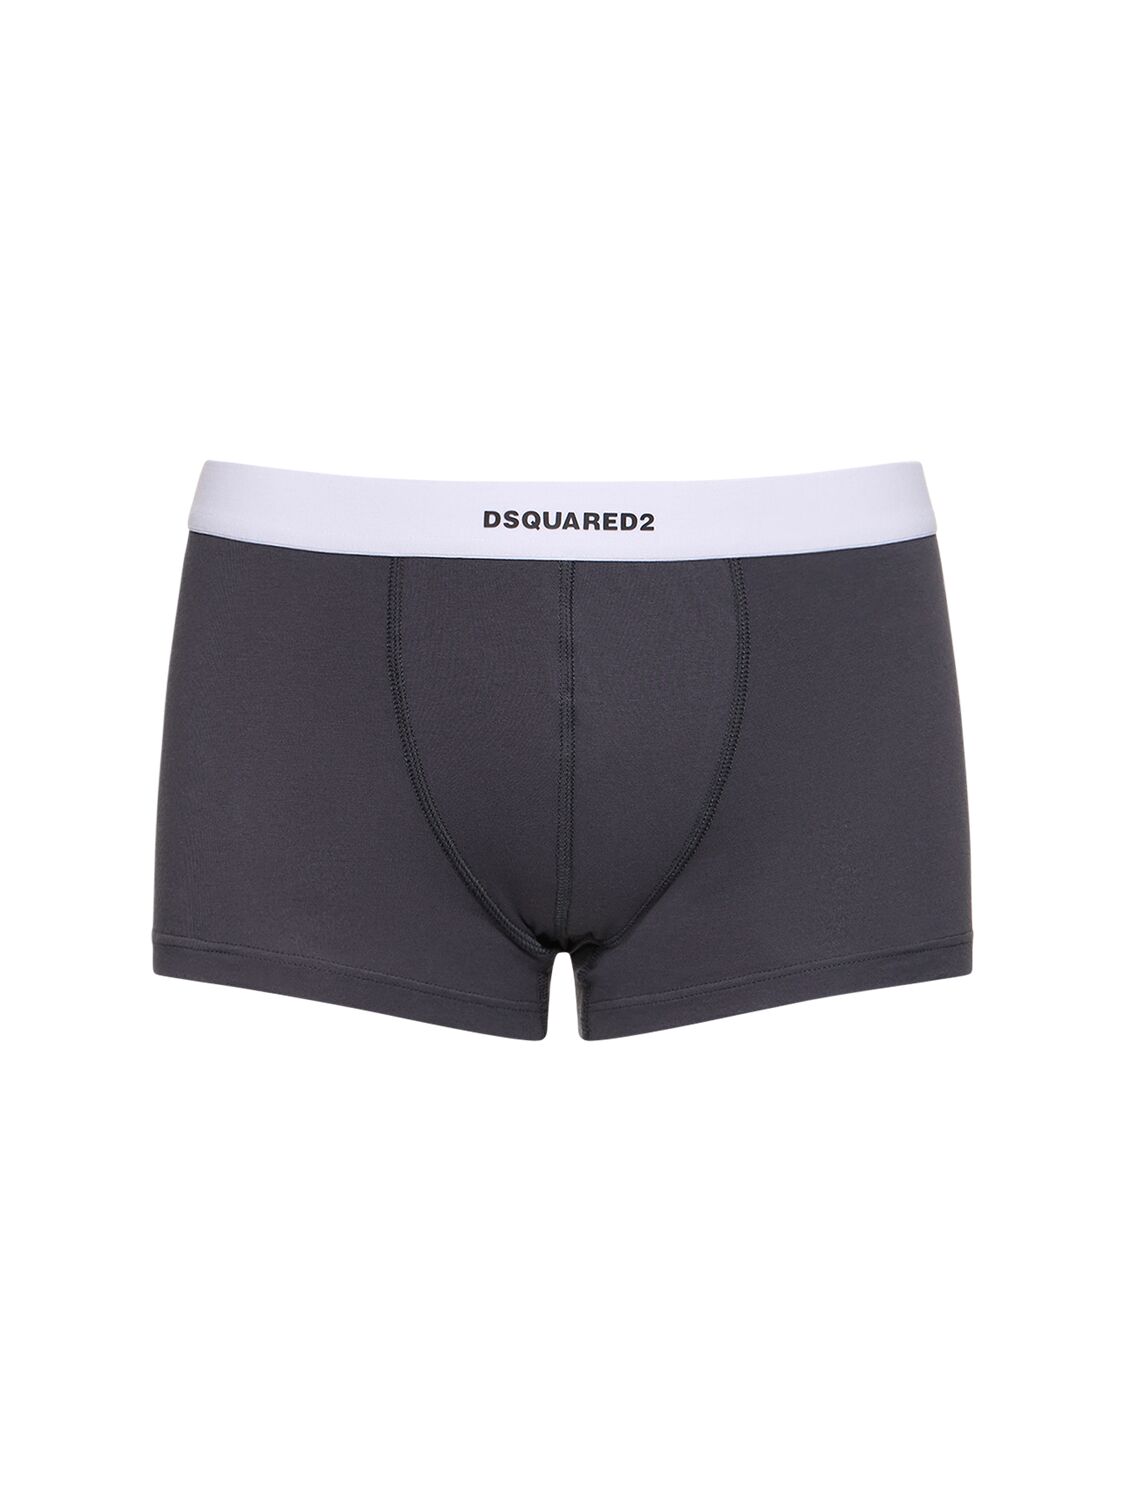 Dsquared2 Logo混棉平角内裤 In Anthracite